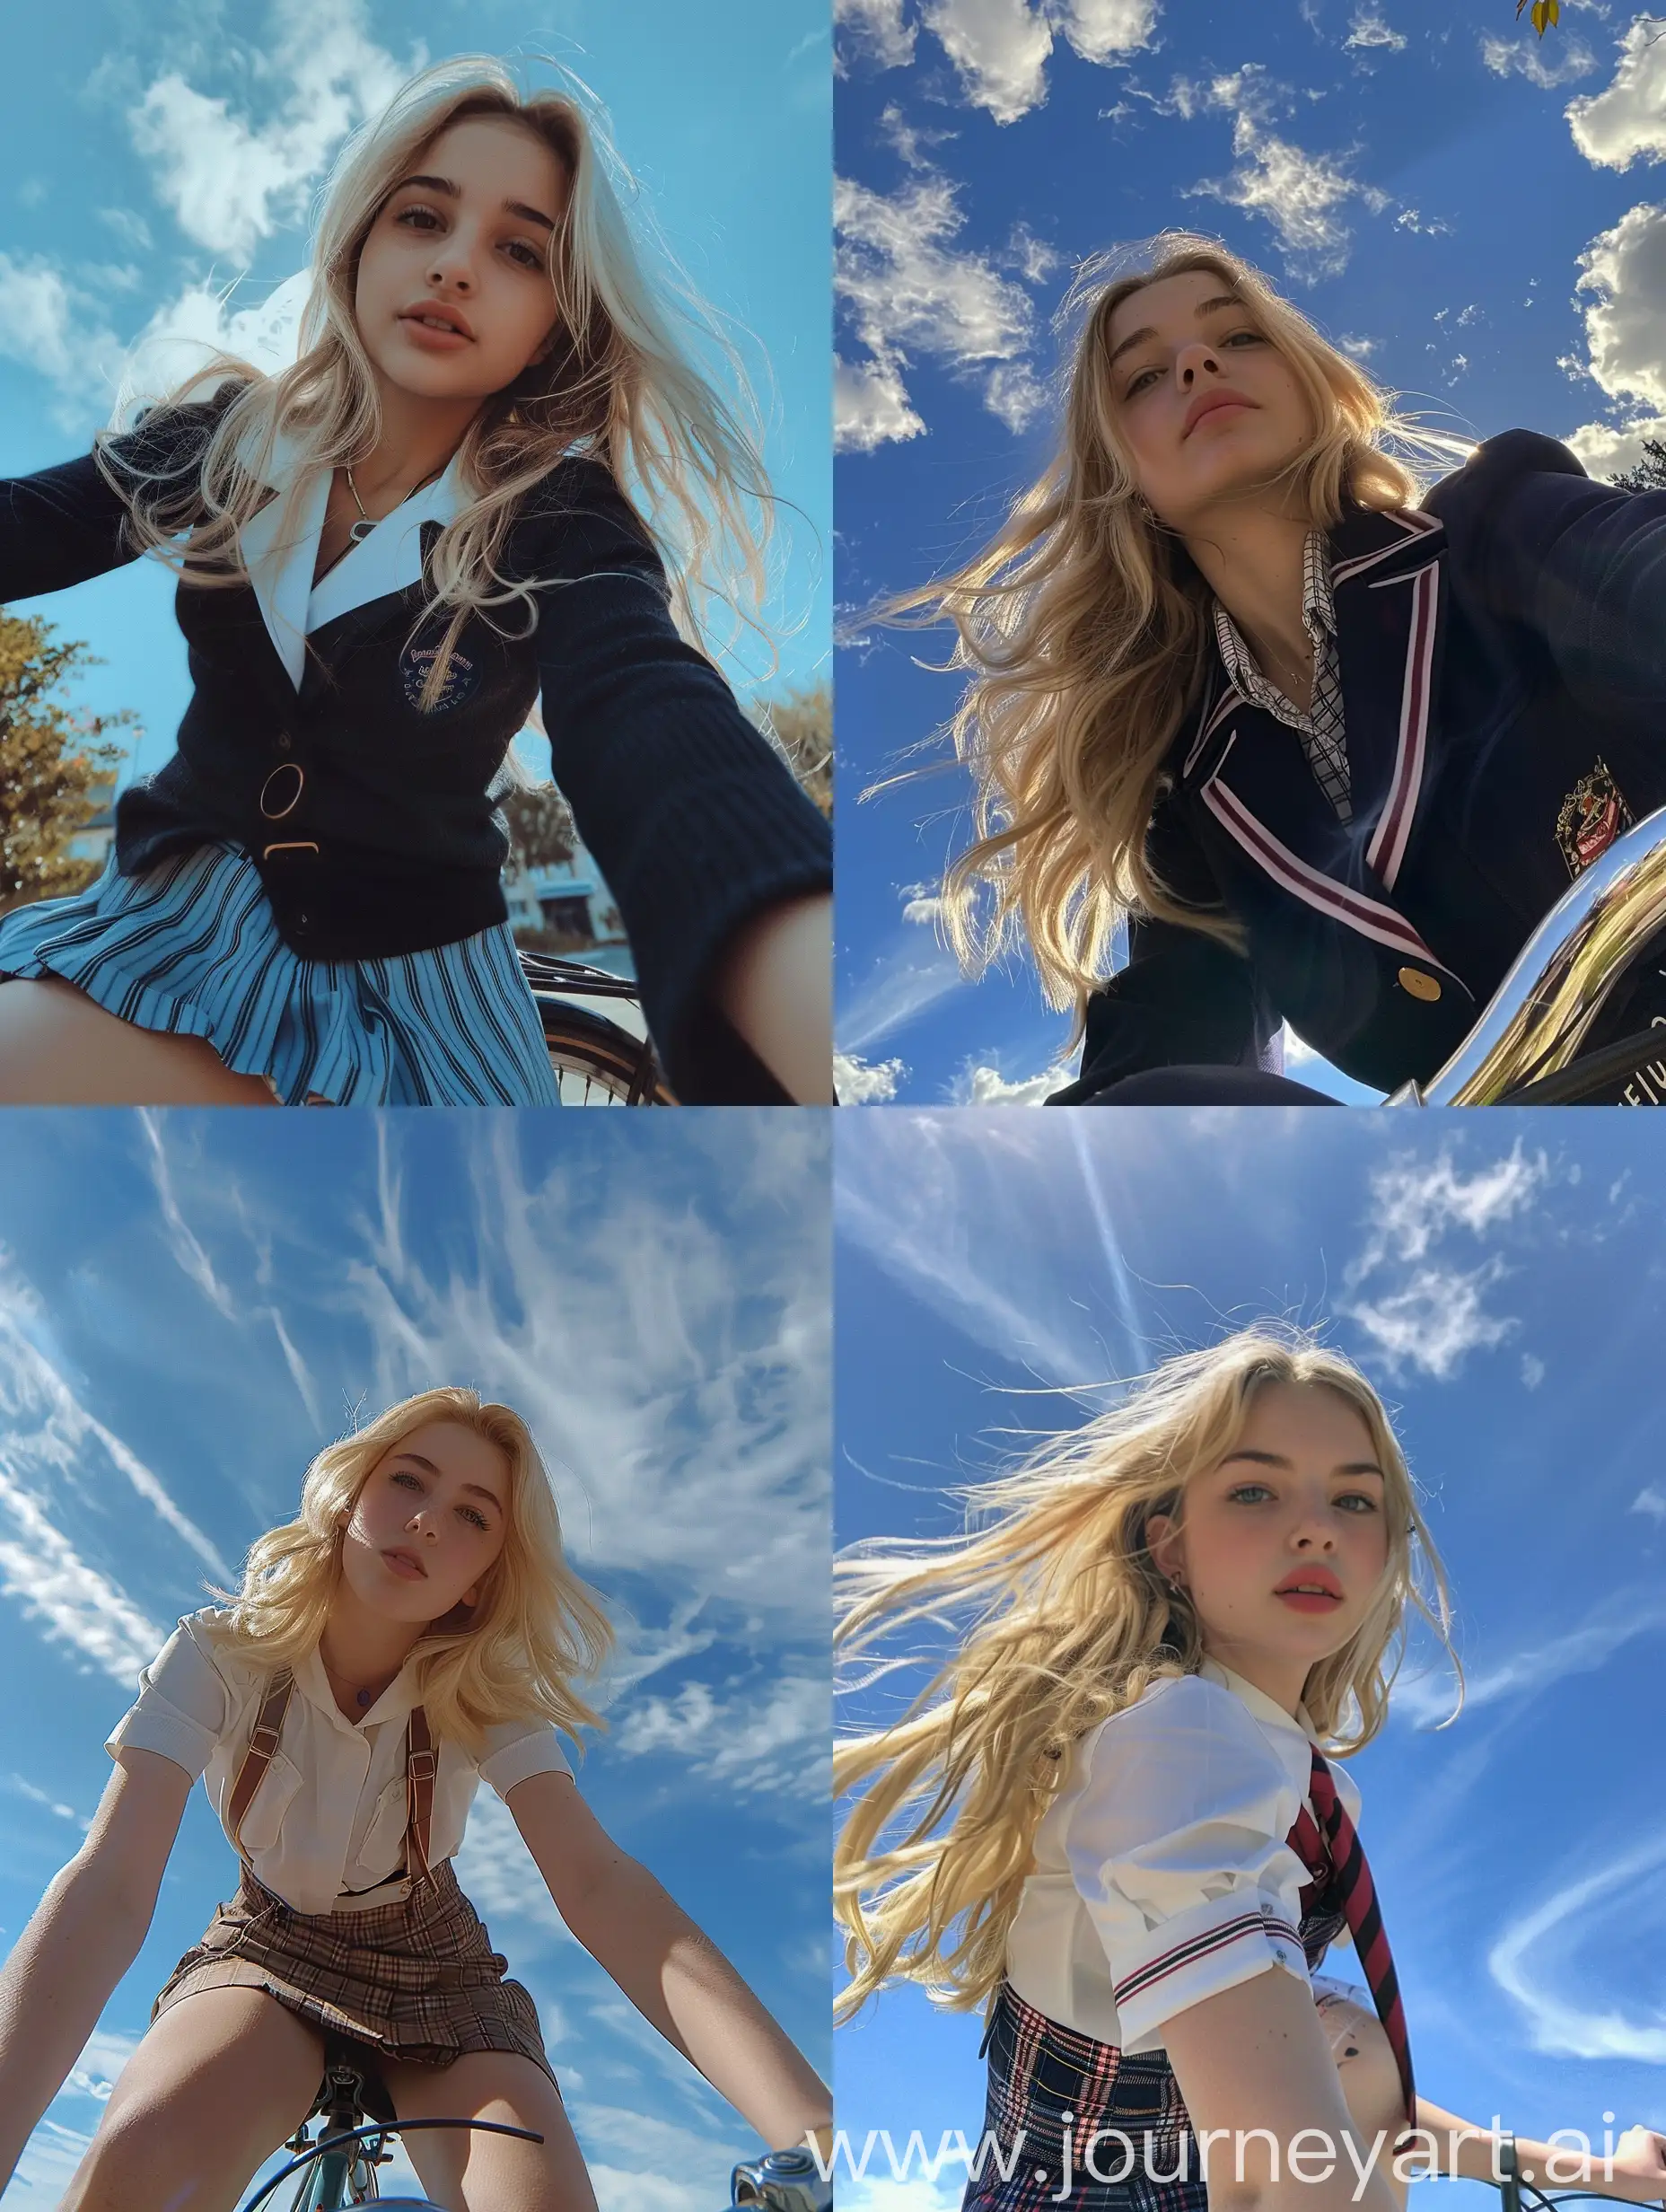 a girl, 22 years old, blonde hair, school uniform, sitting on a bicycle, no effects, selfie , iphone selfie, no filters, natural , iphone photo natural, camera down angle, sky view, down view